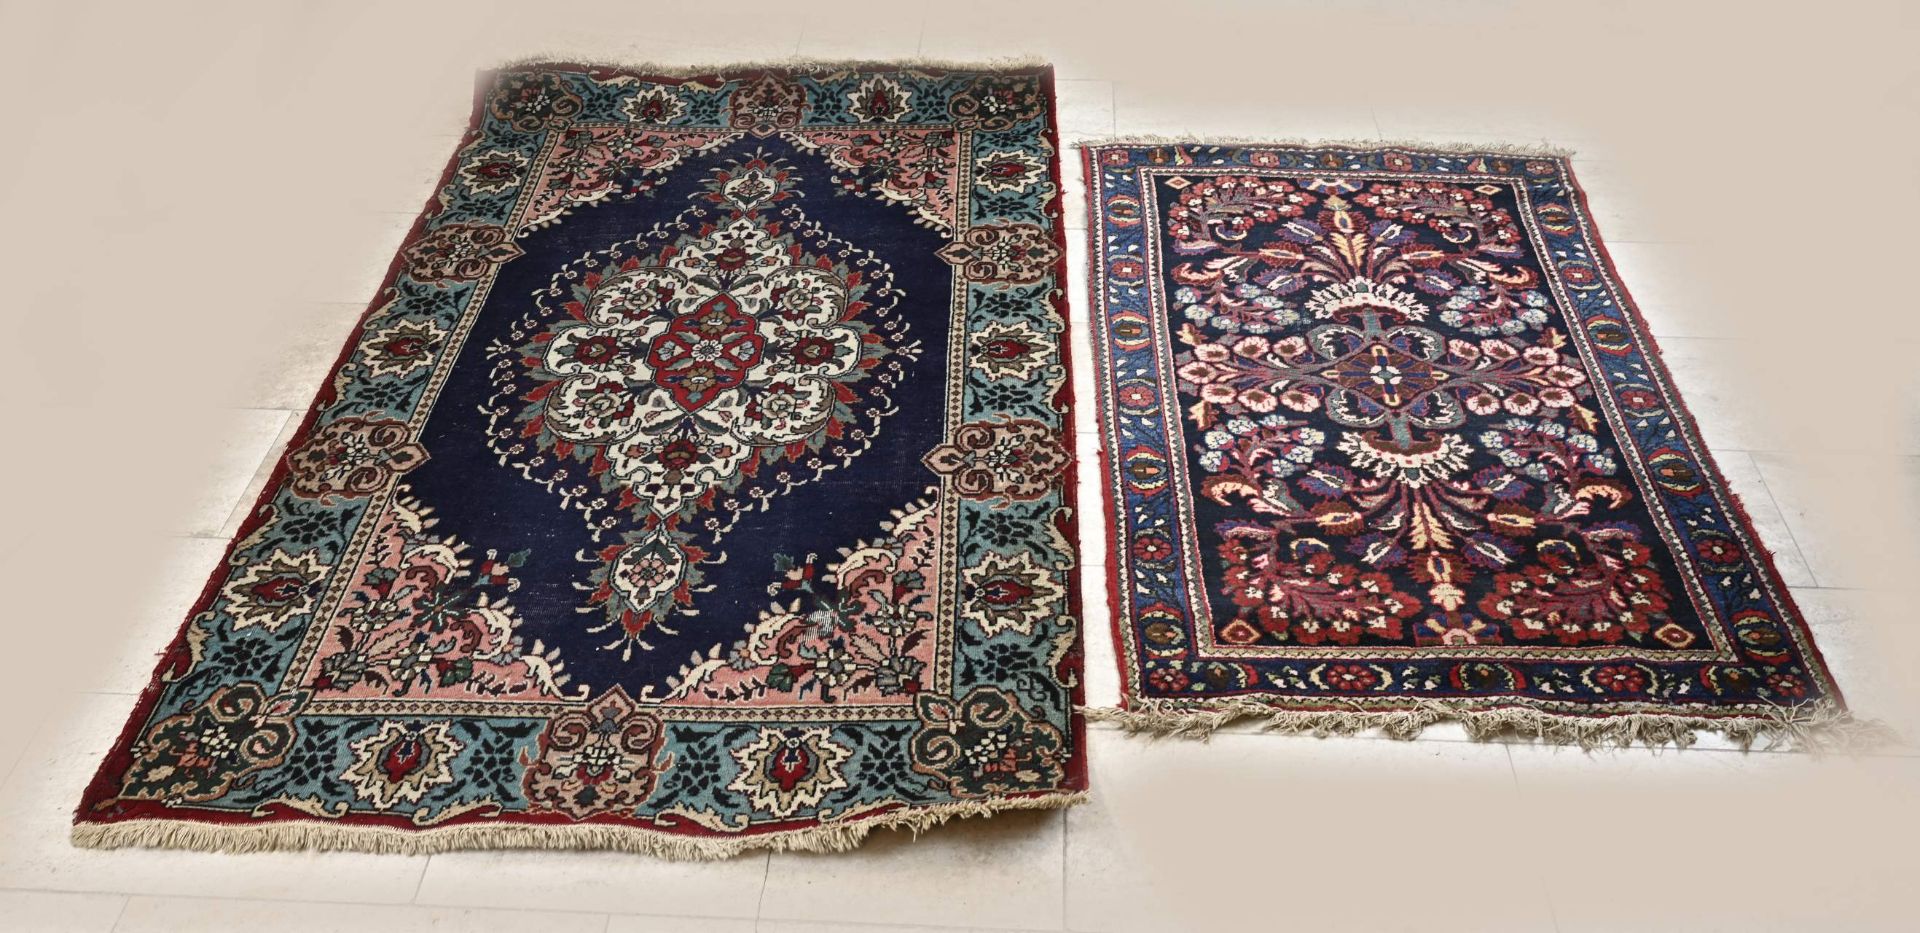 Two hand-knotted rugs